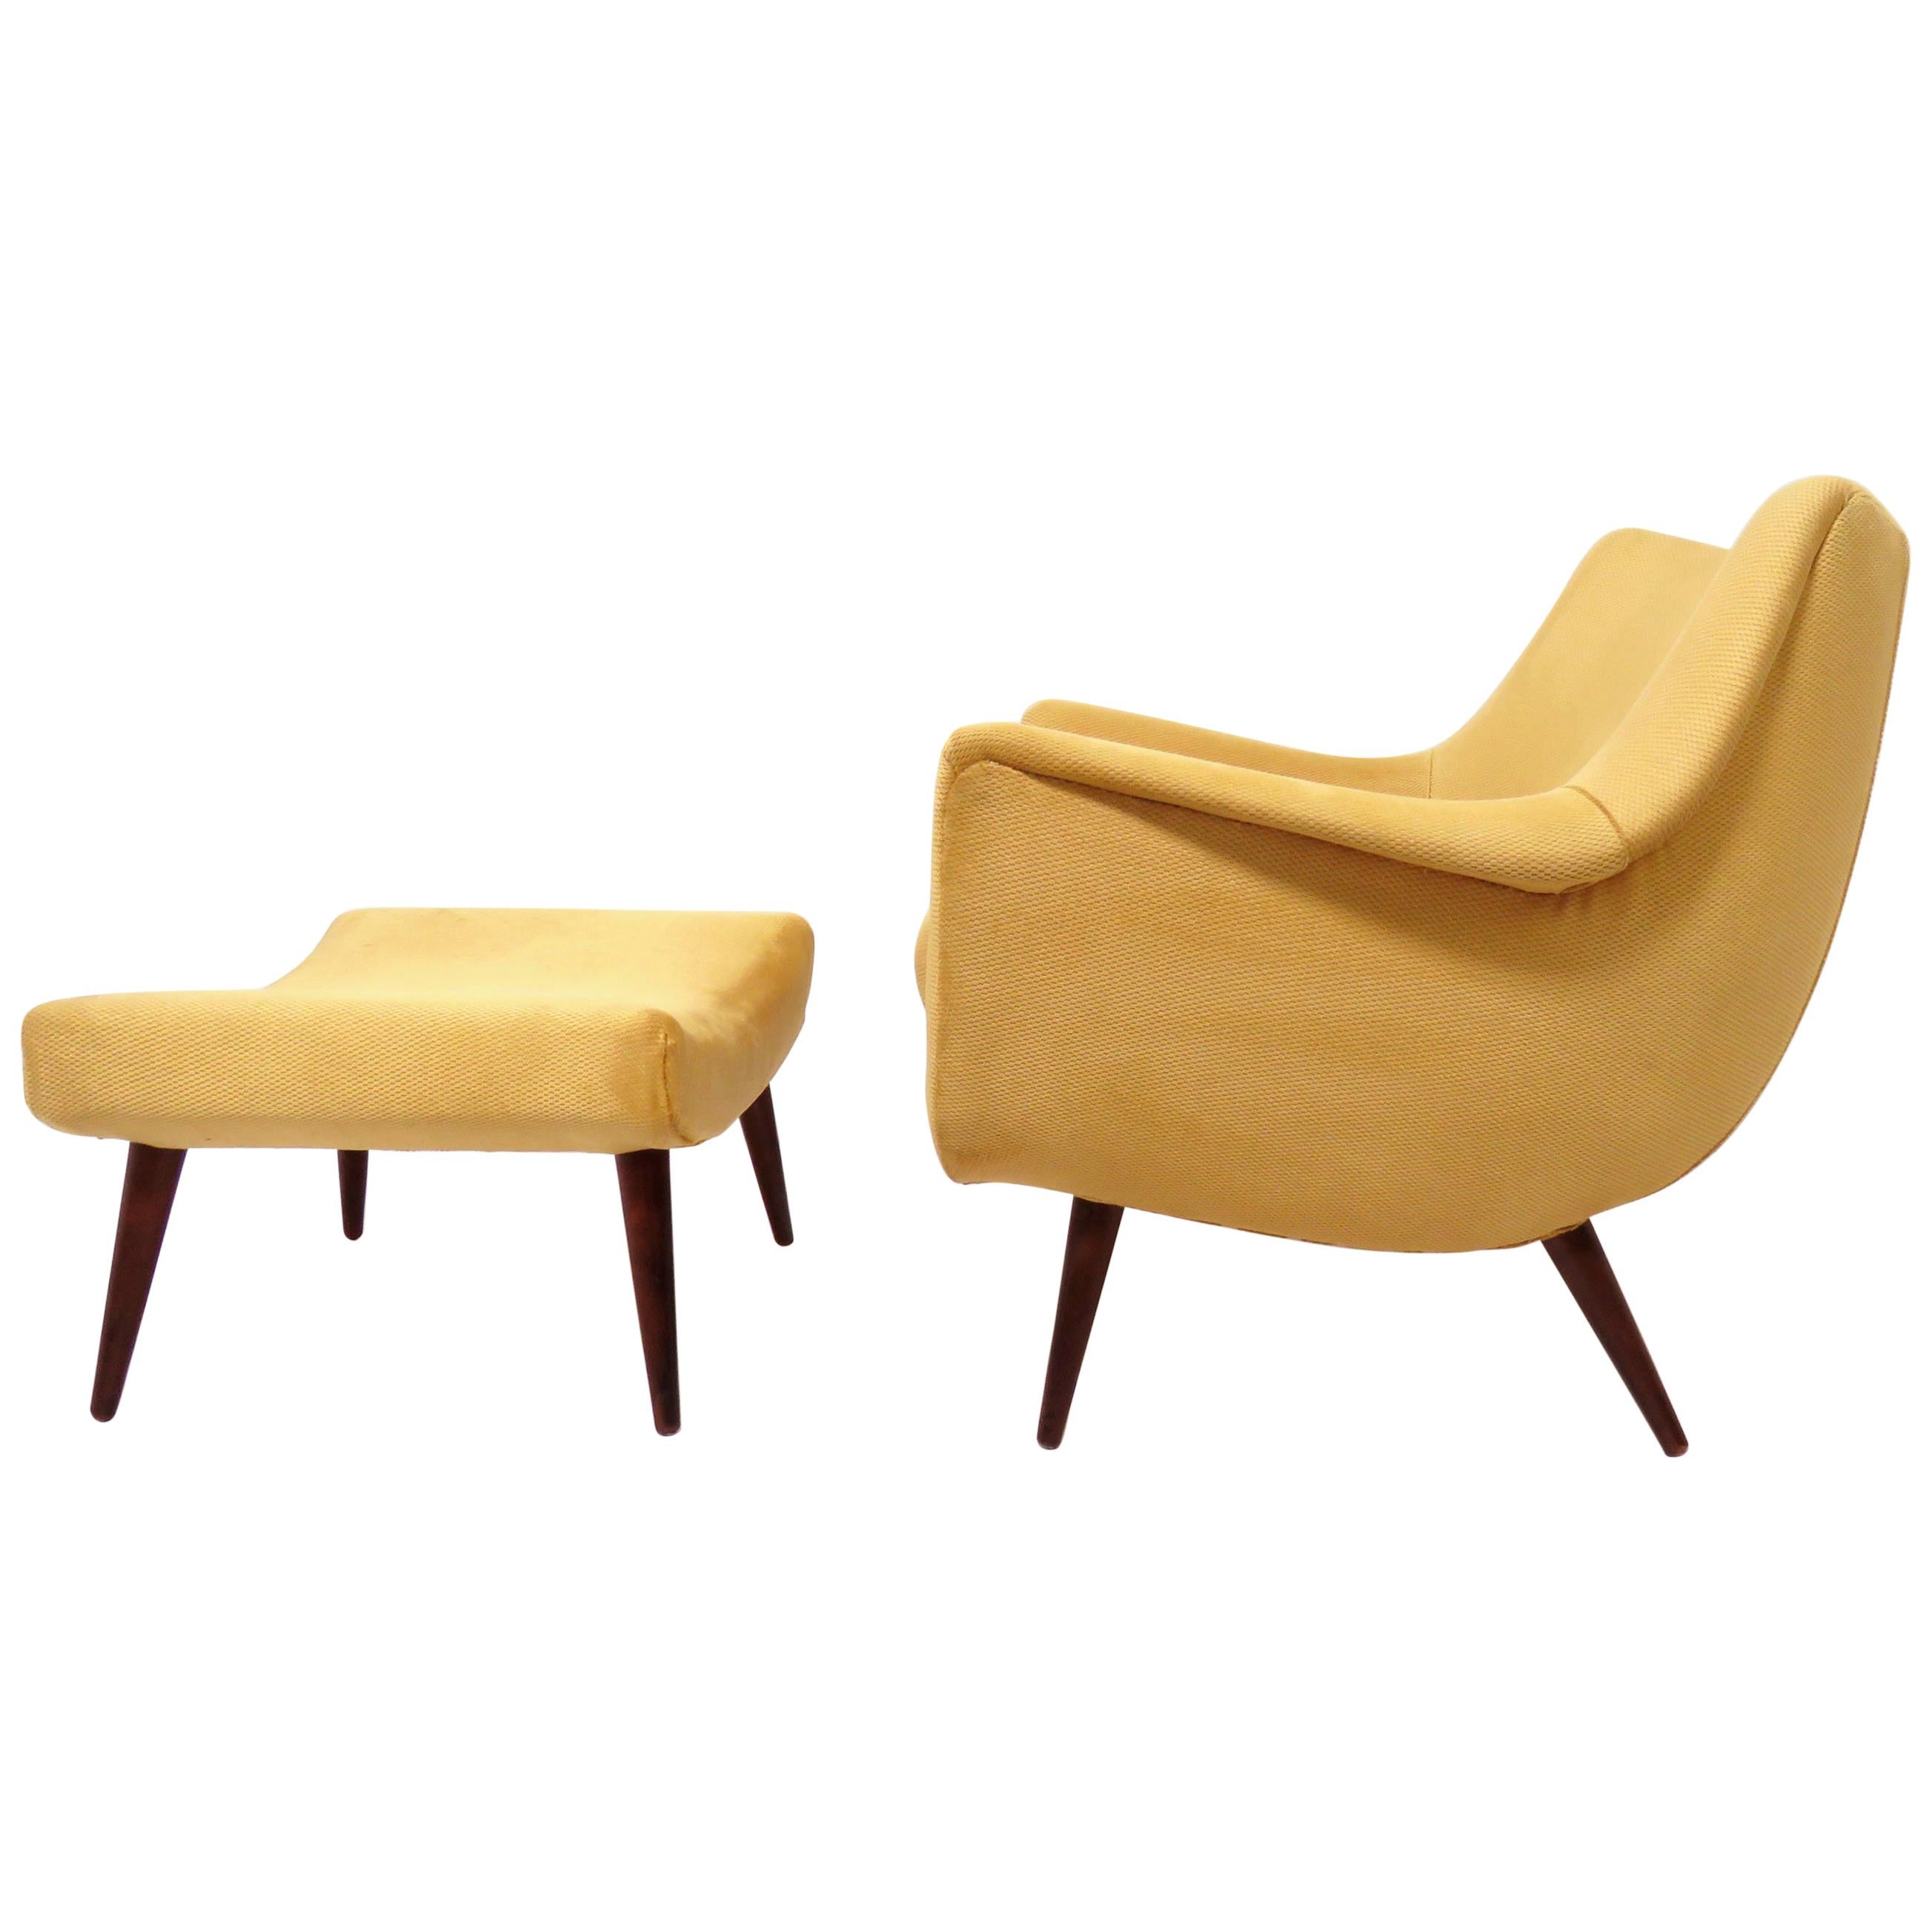 Lawrence Peabody Midcentury Lounge Chair and Ottoman, circa 1950s